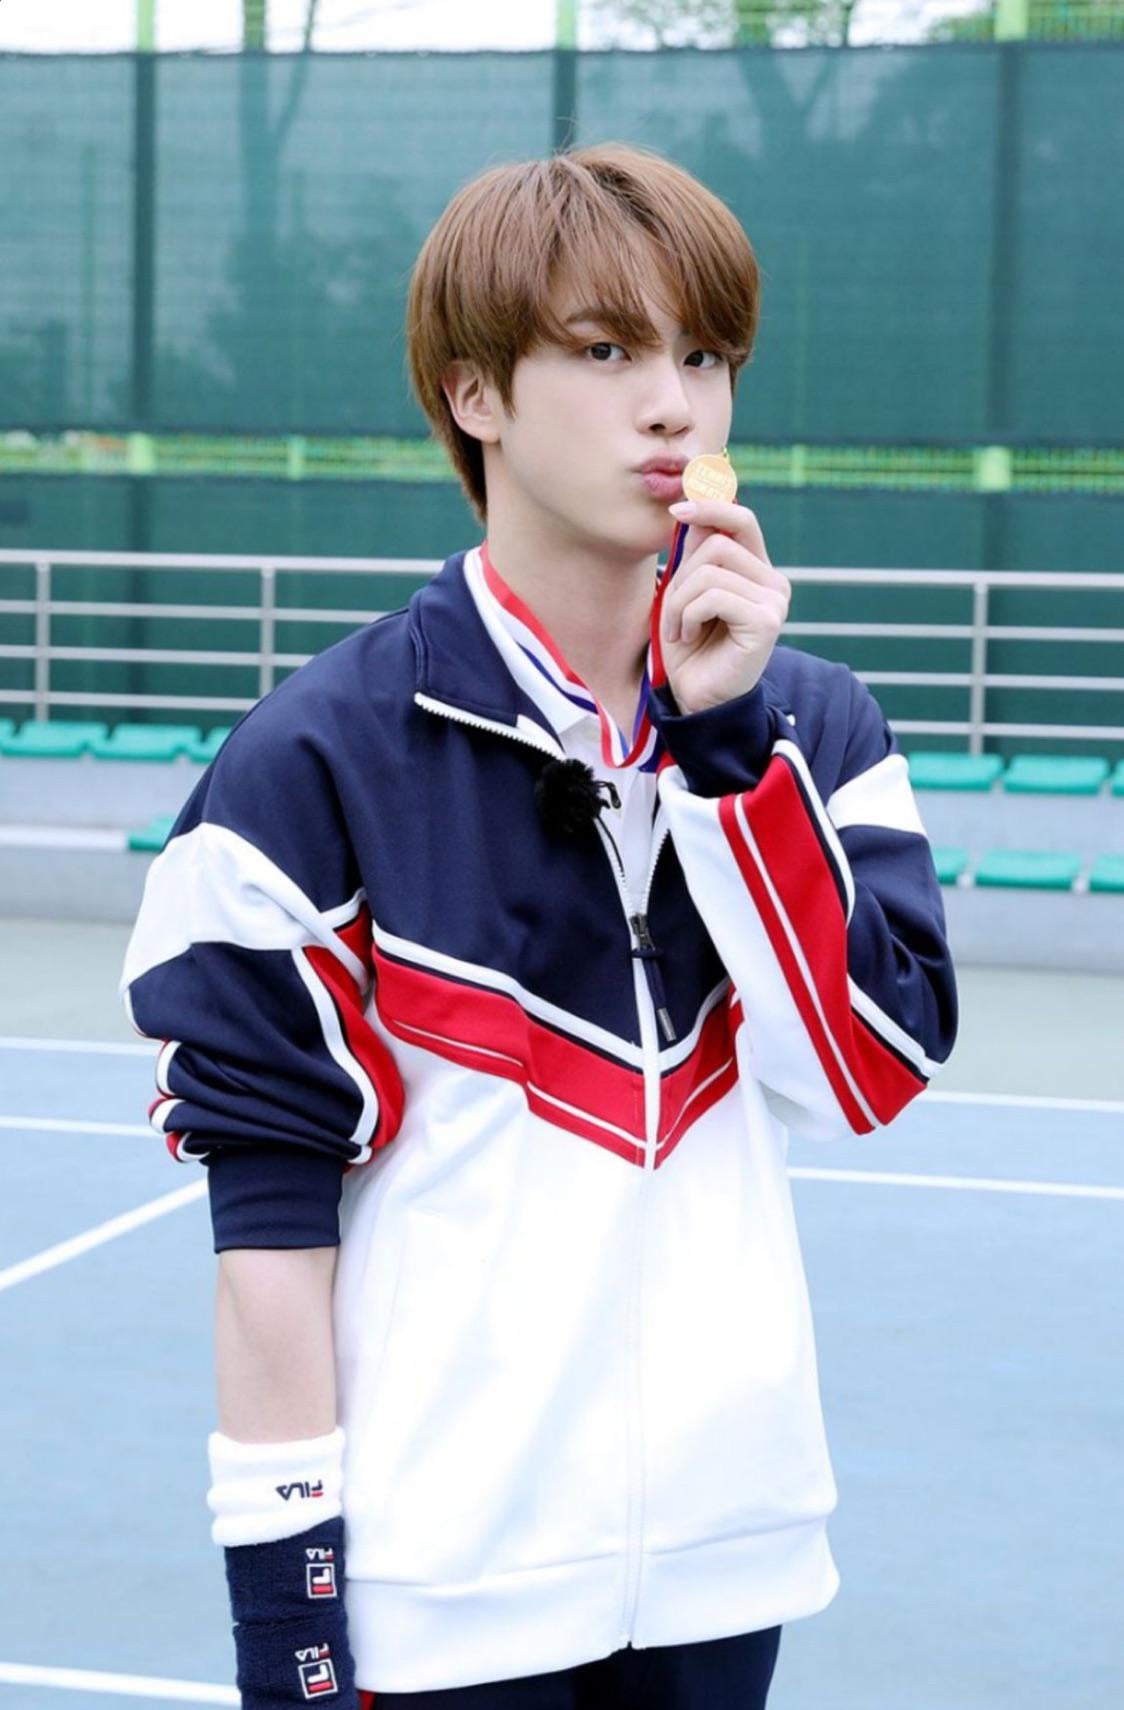 2024 OLYMPIC GOLD MEDALIST JIN!🥇